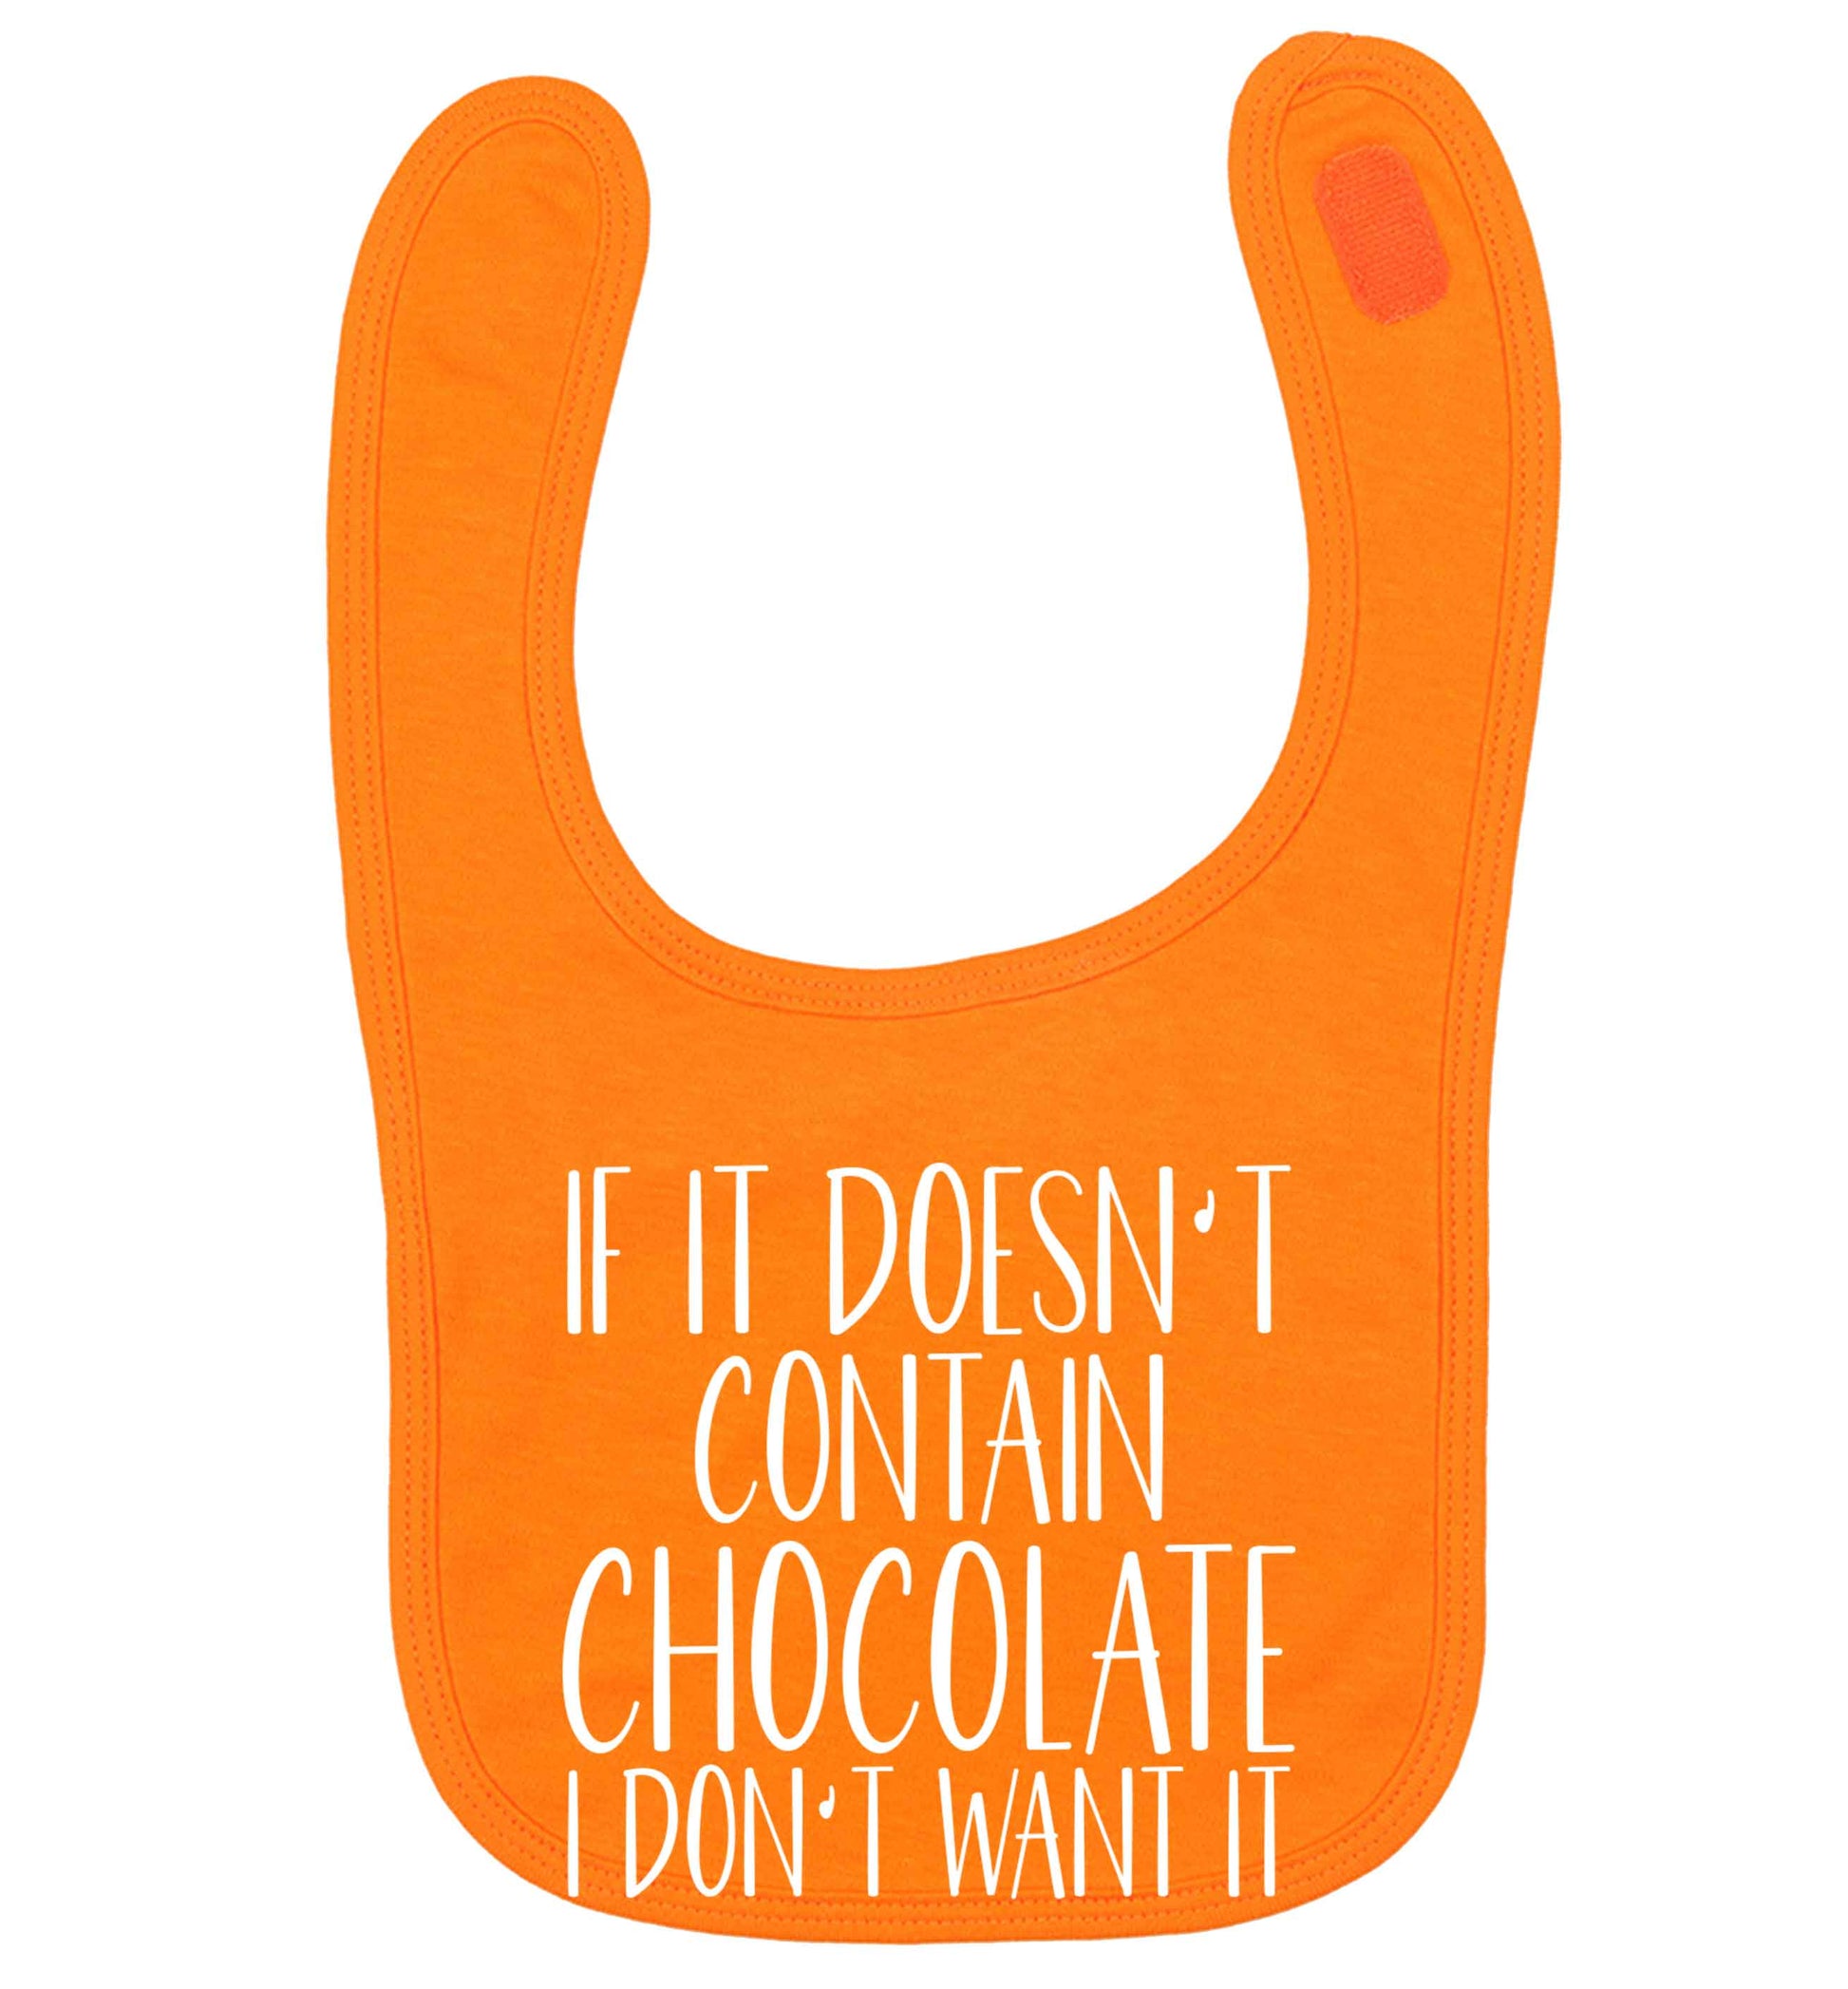 If it doesn't contain chocolate I don't want it orange baby bib